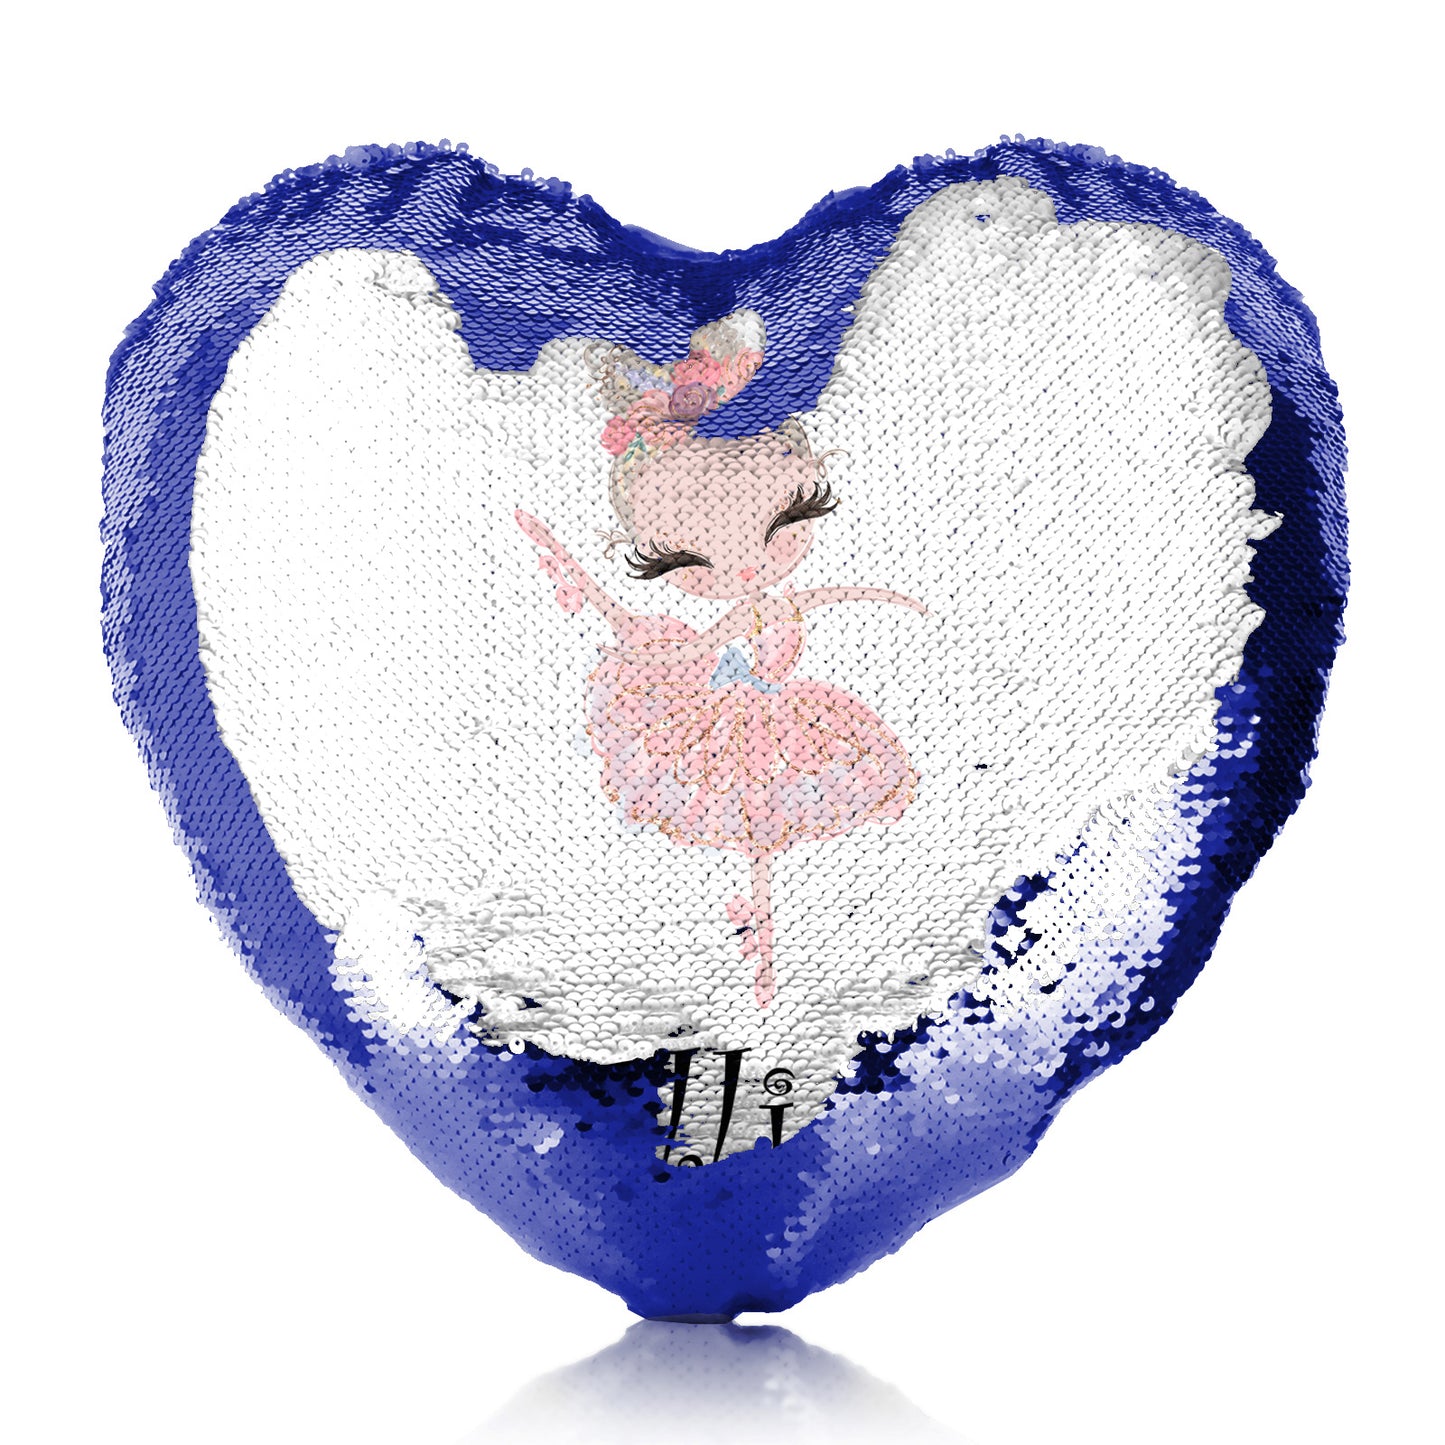 Personalised Sequin Heart Cushion with Cute Text and Blonde Hair Pink Dress Ballerina